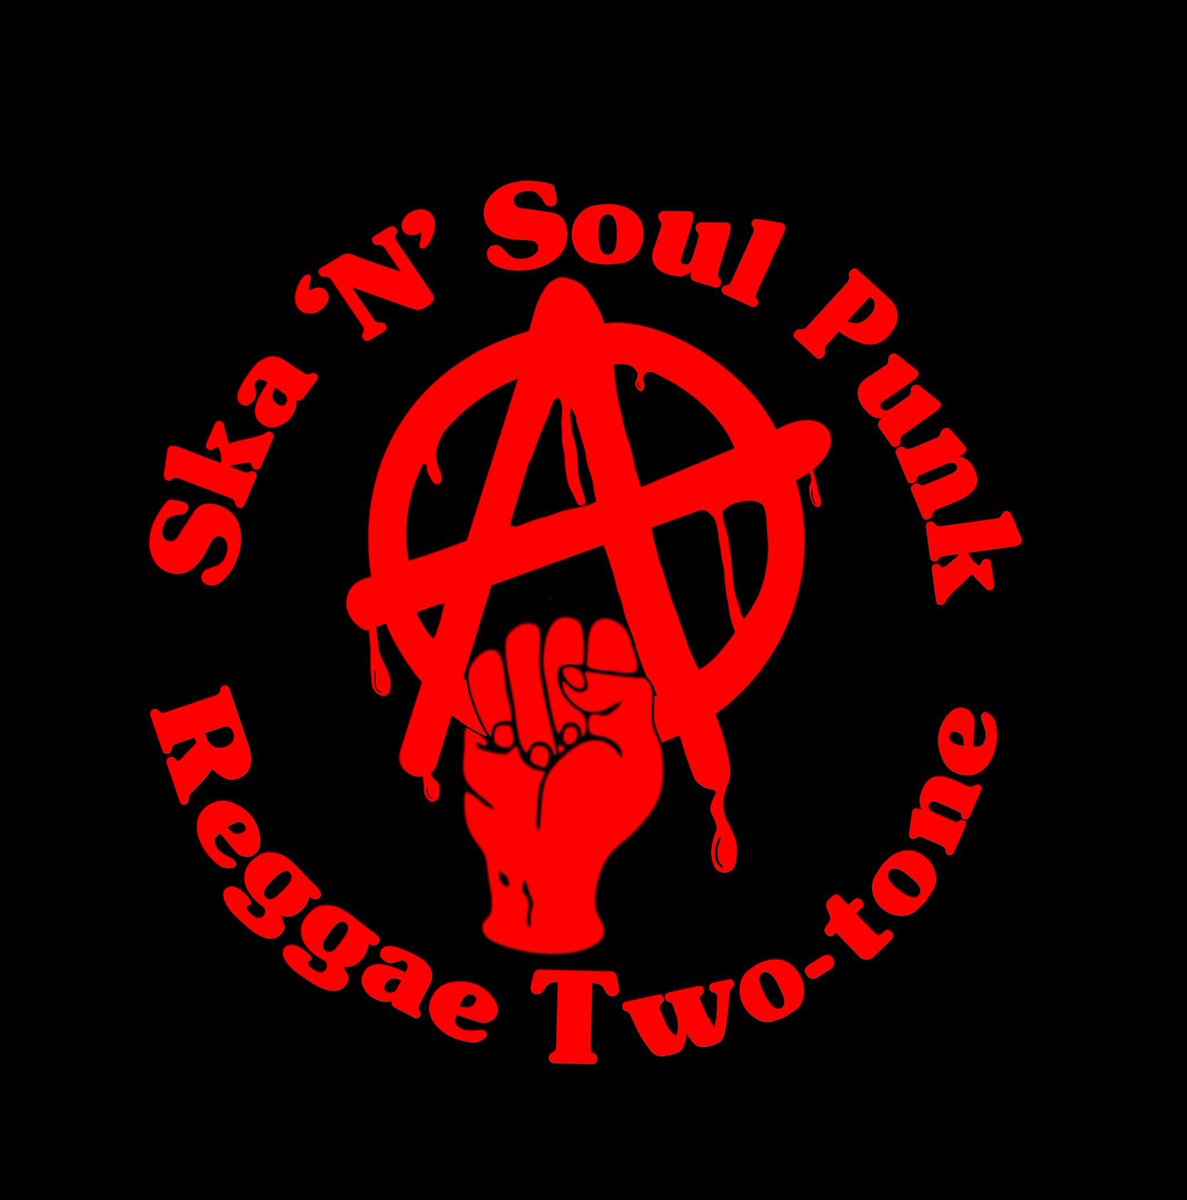 Just a new 1 off venture on #skaNsoul 
 t shirts #SkaNSoul,#punk , #reggae #twotone delivery this week I've been promised.
To those who have ordered,great stuff I'll be in touch when they're in btw .
Thanks again everyone.
If you want 1 you'll have to be quick.